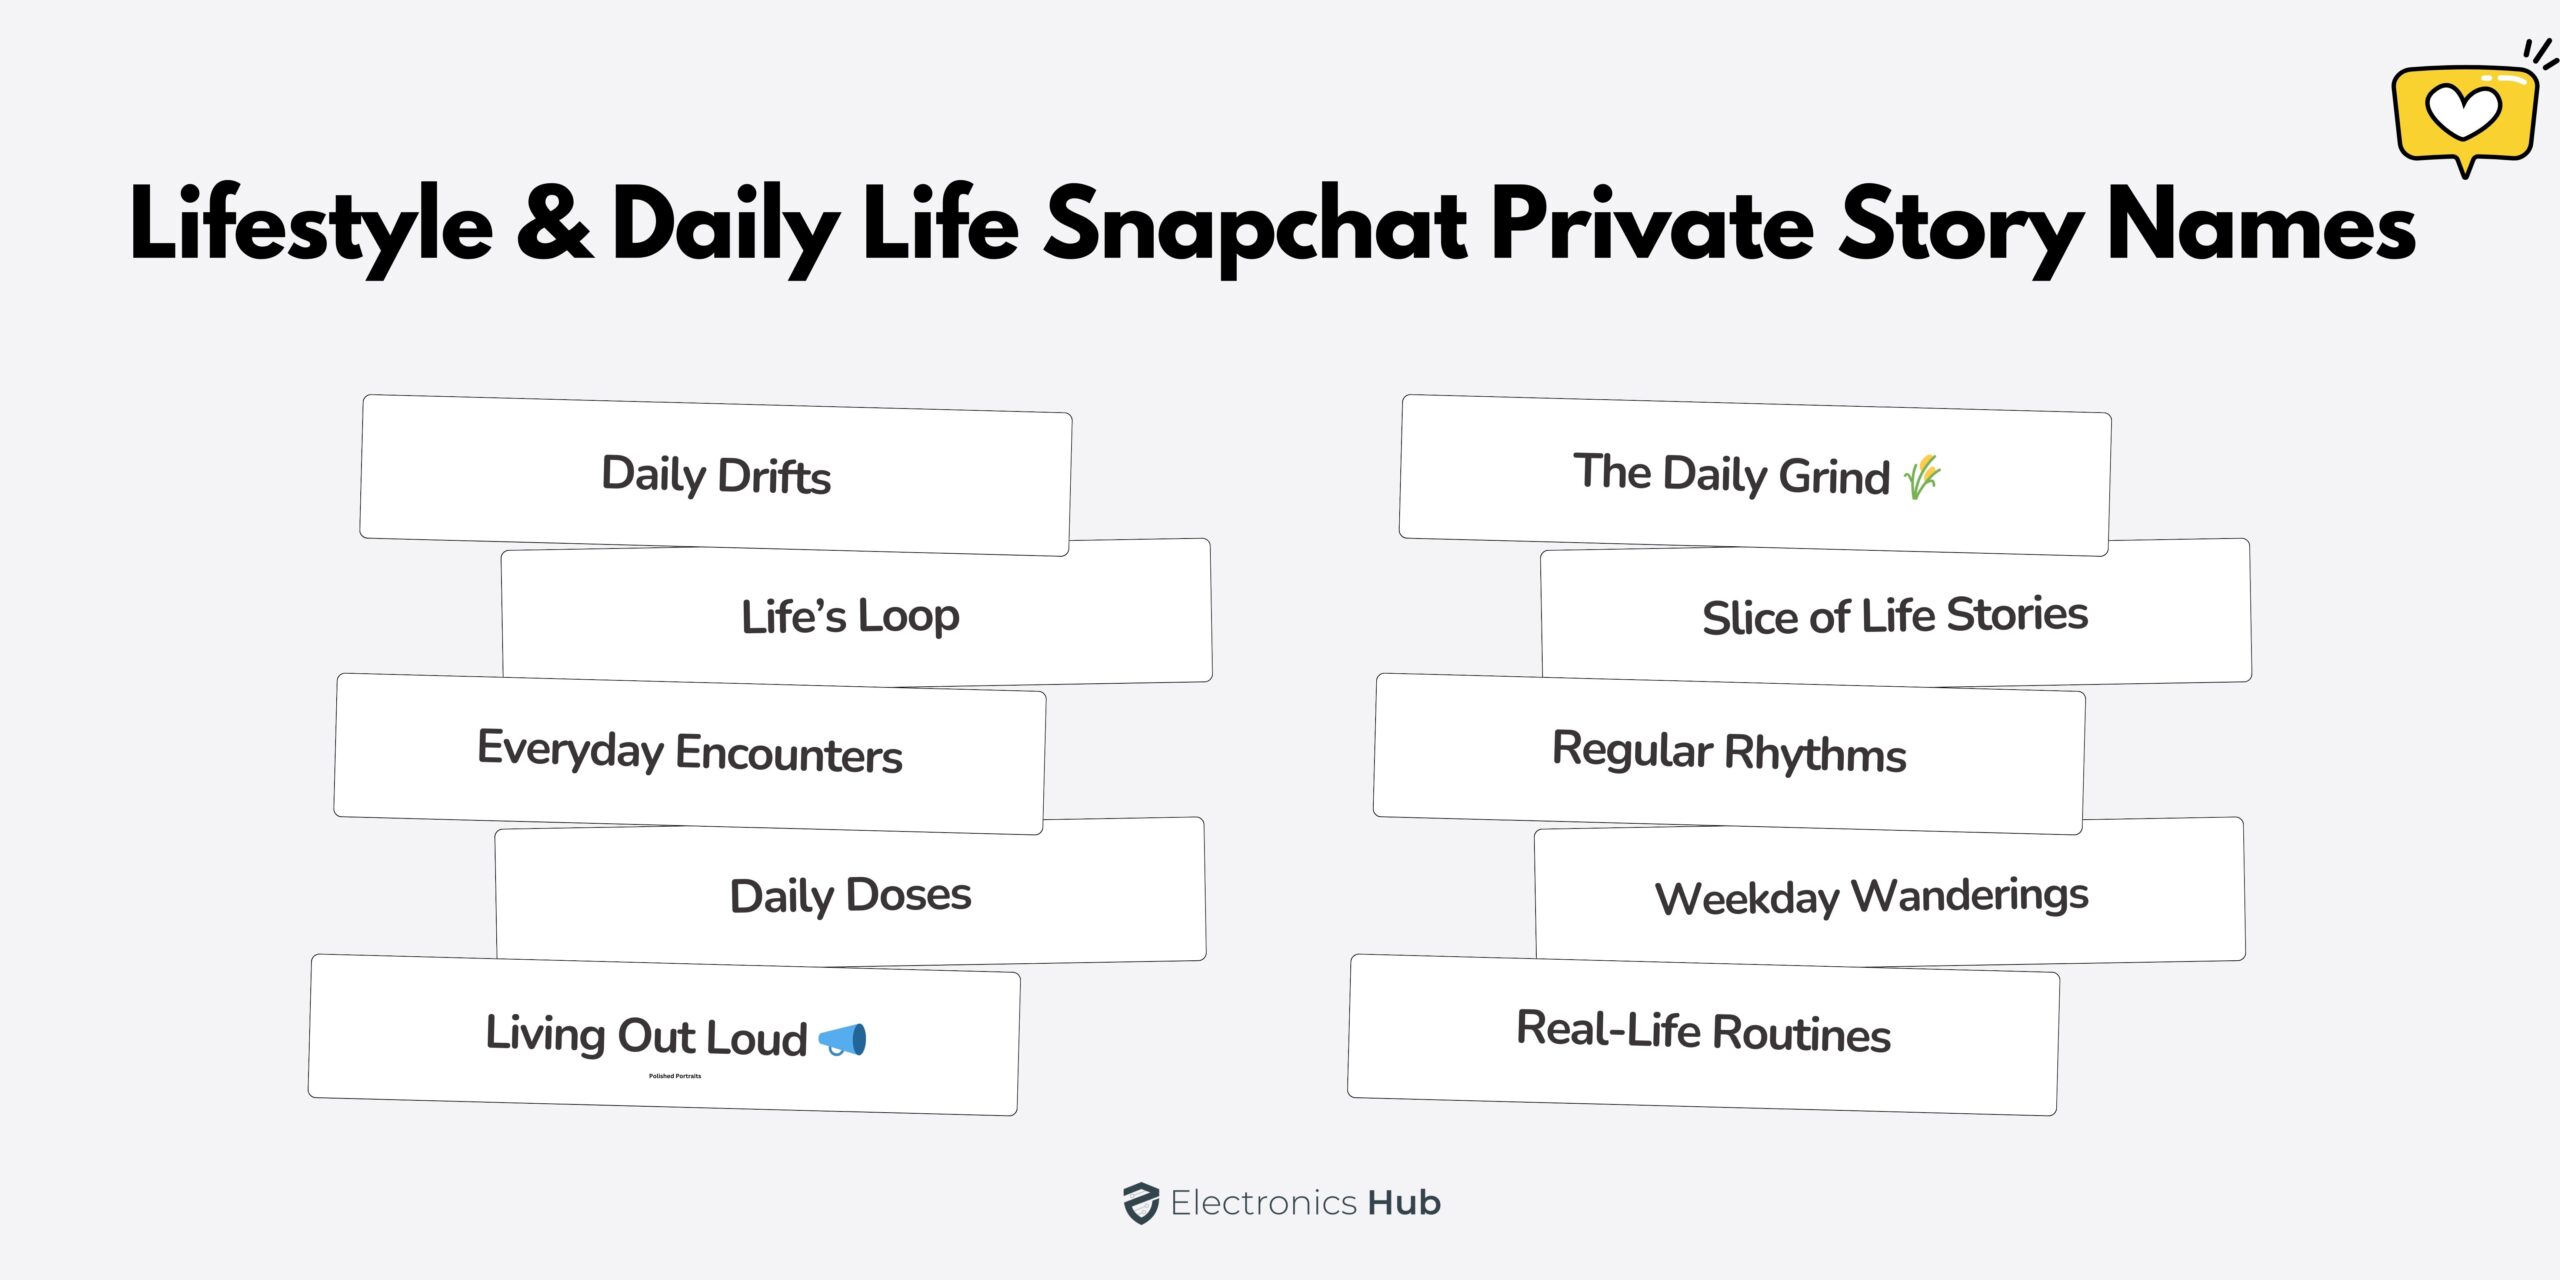 Snapchat Private Story Names for Daily Life/Lifestyle